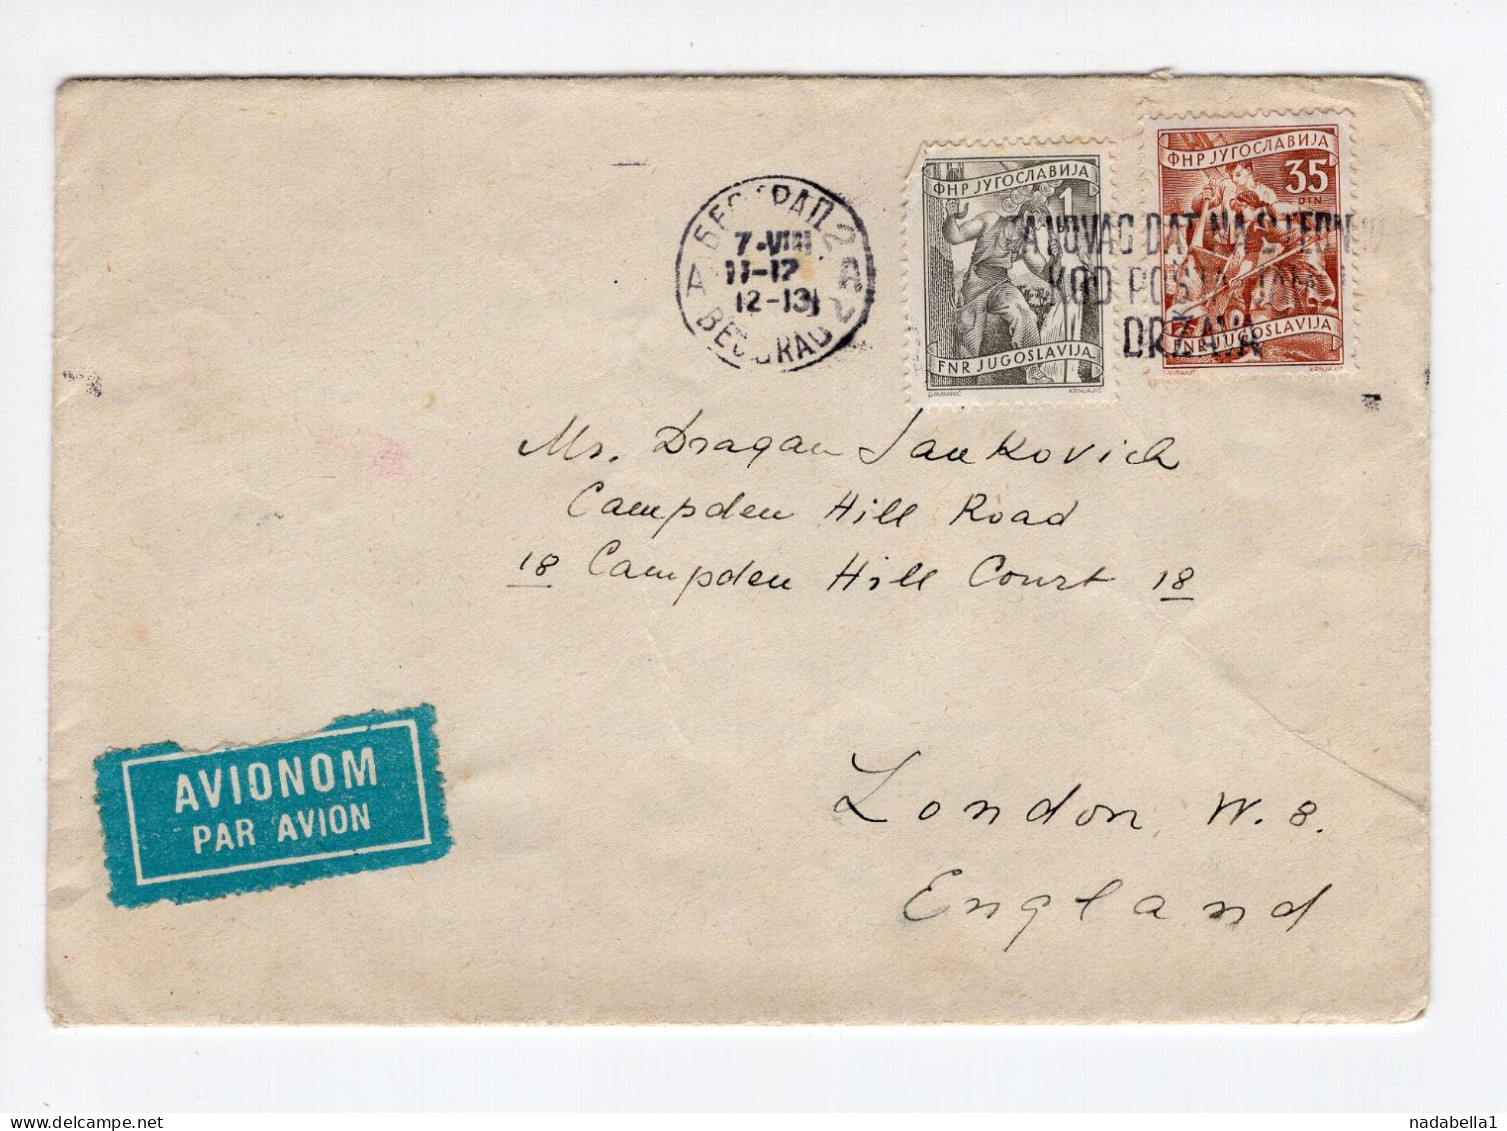 1957. YUGOSLAVIA,SERBIA,BELGRADE,AIRMAIL COVER TO LONDON,GREAT BRITAIN,LETTER INSIDE - Luchtpost